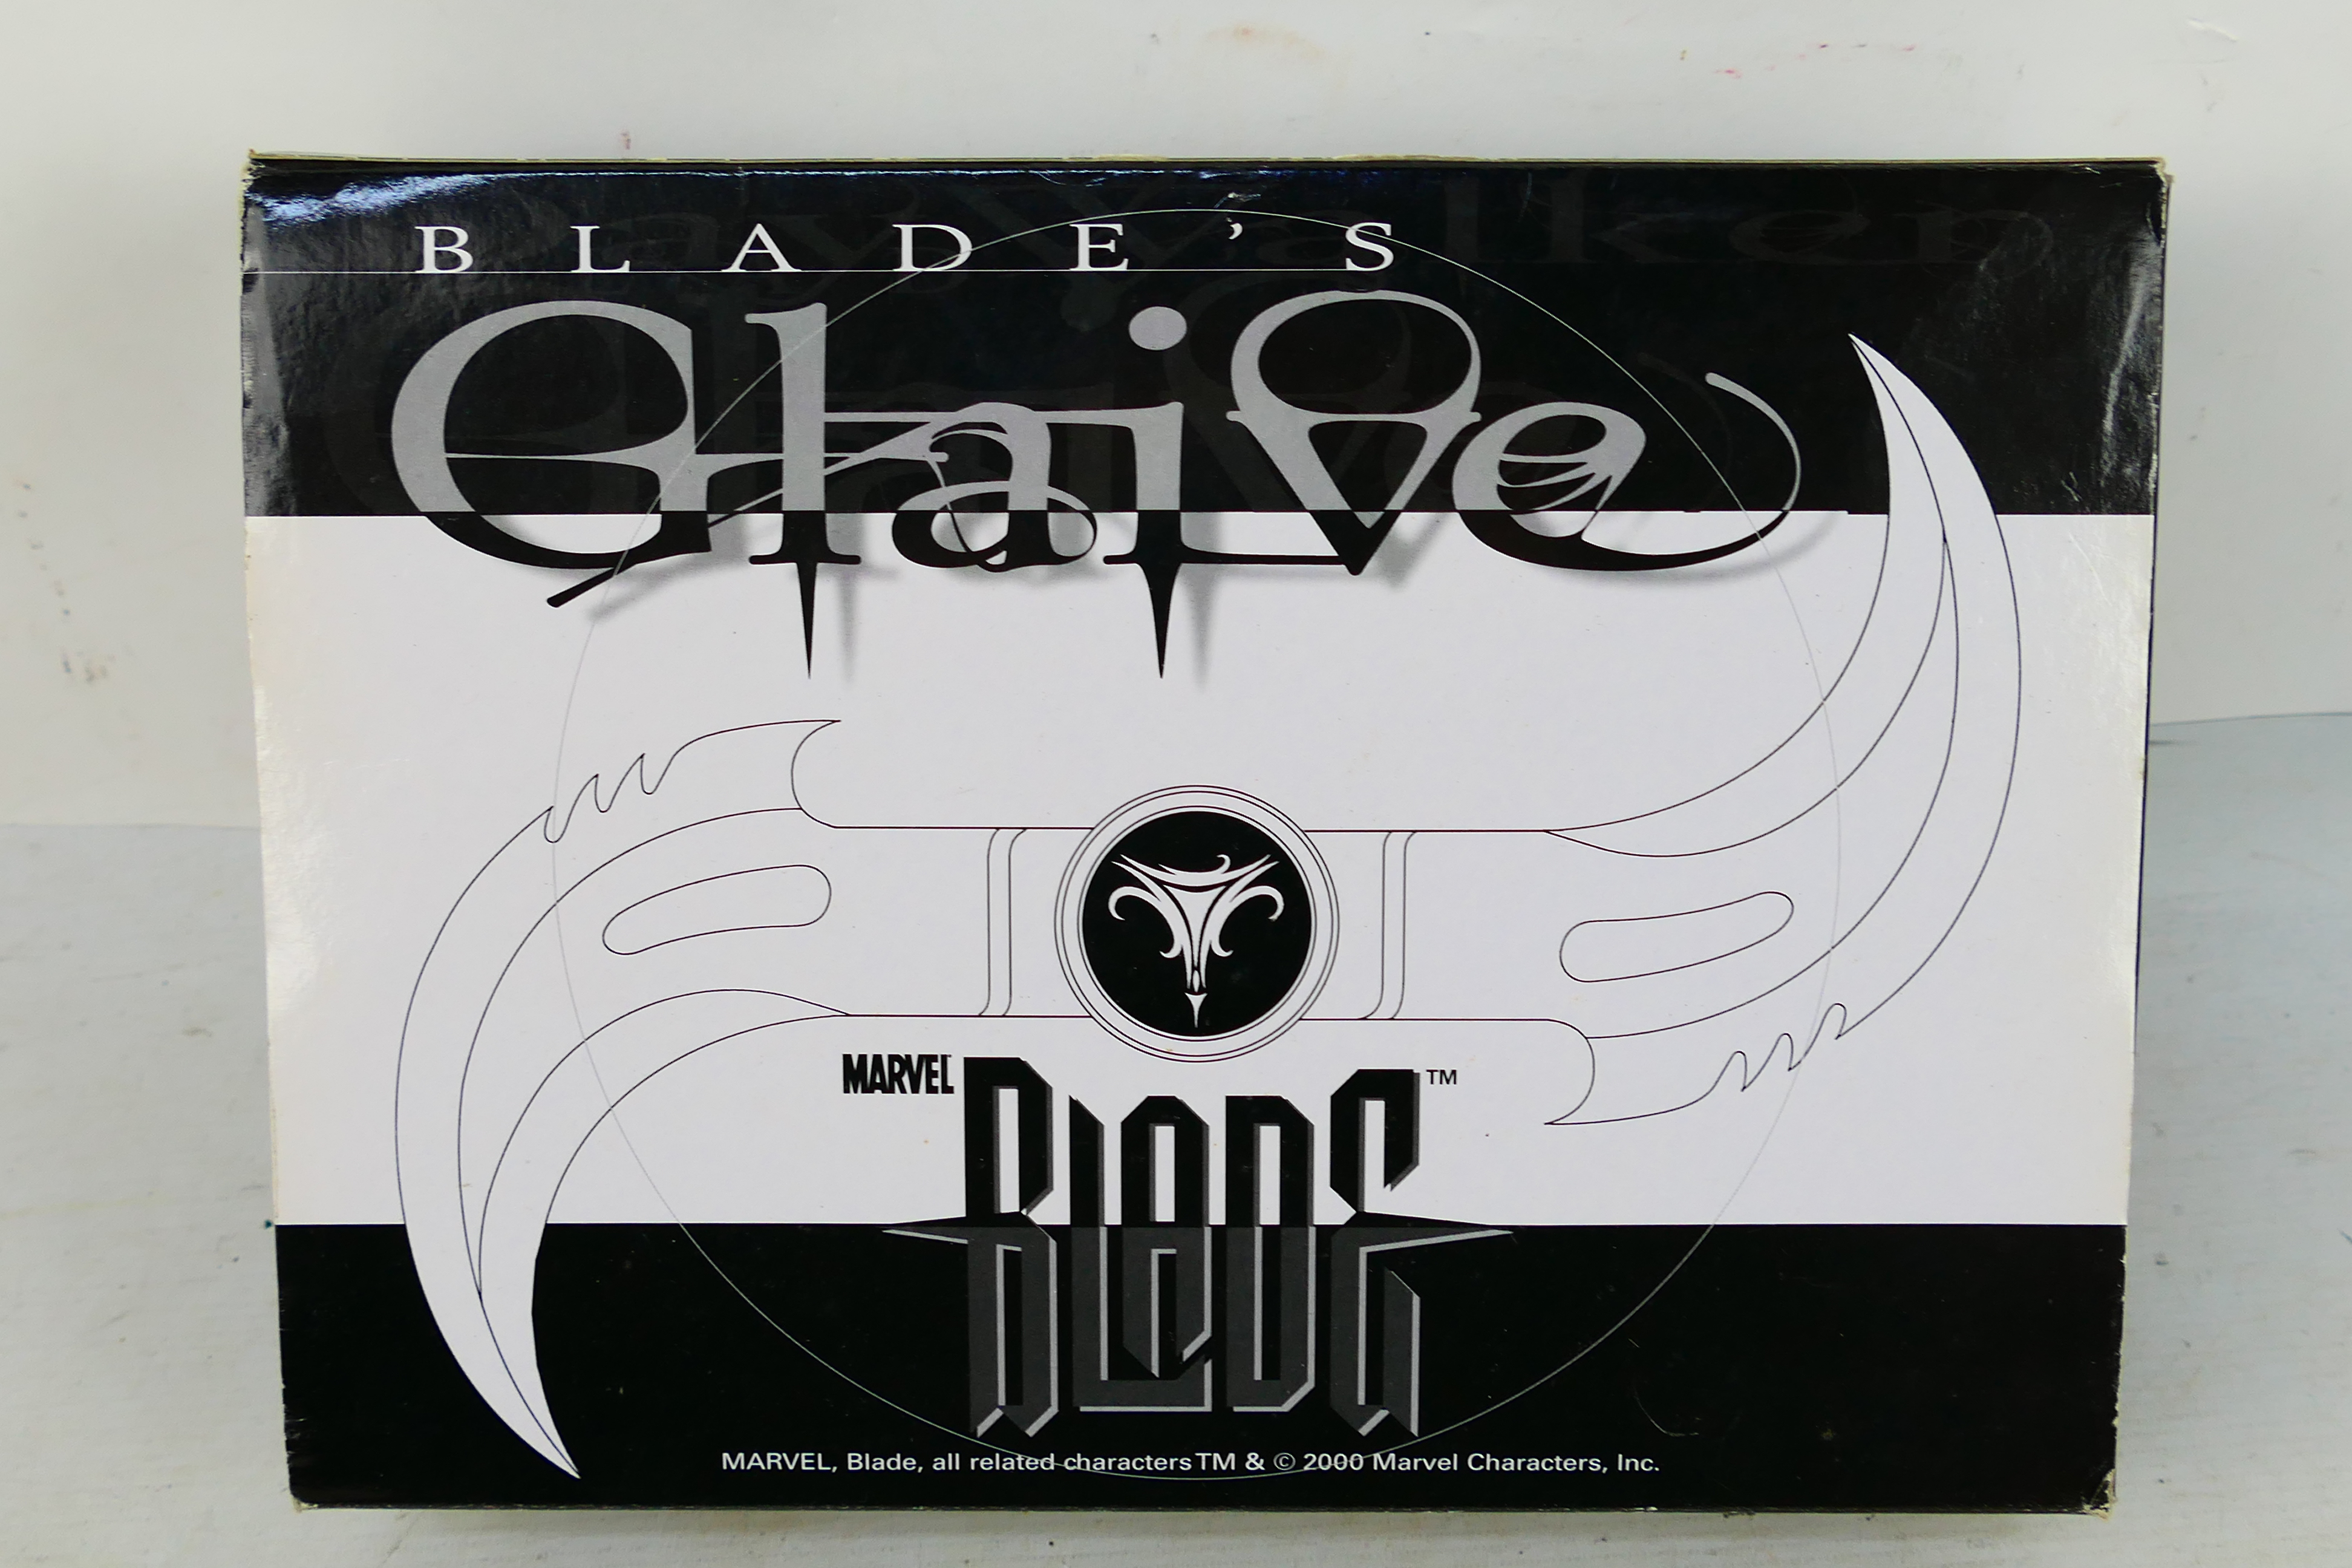 A boxed Marvel Blade replica weapon, Blade's Glaive, with wall mountable display stand. - Image 7 of 8